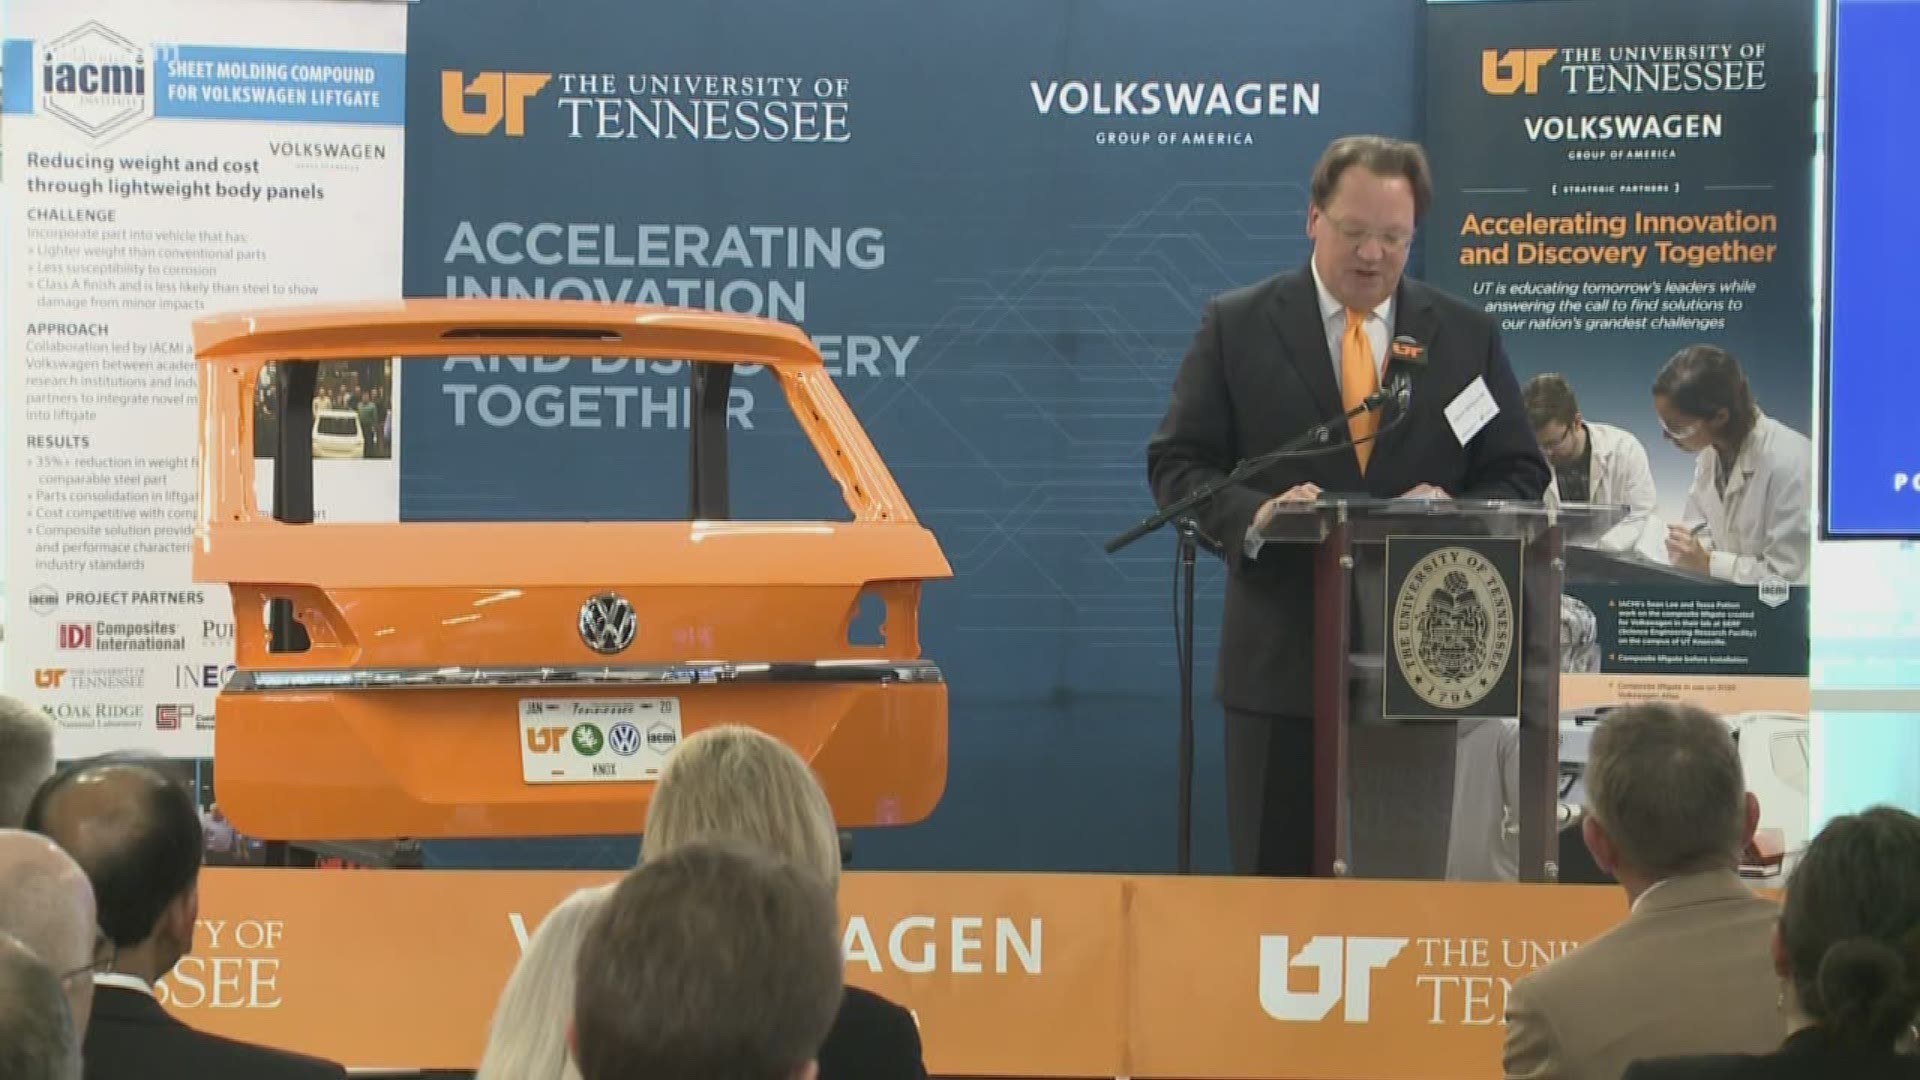 UT and ORNL are partnering with Volkswagen to create its first innovation hub in North America.